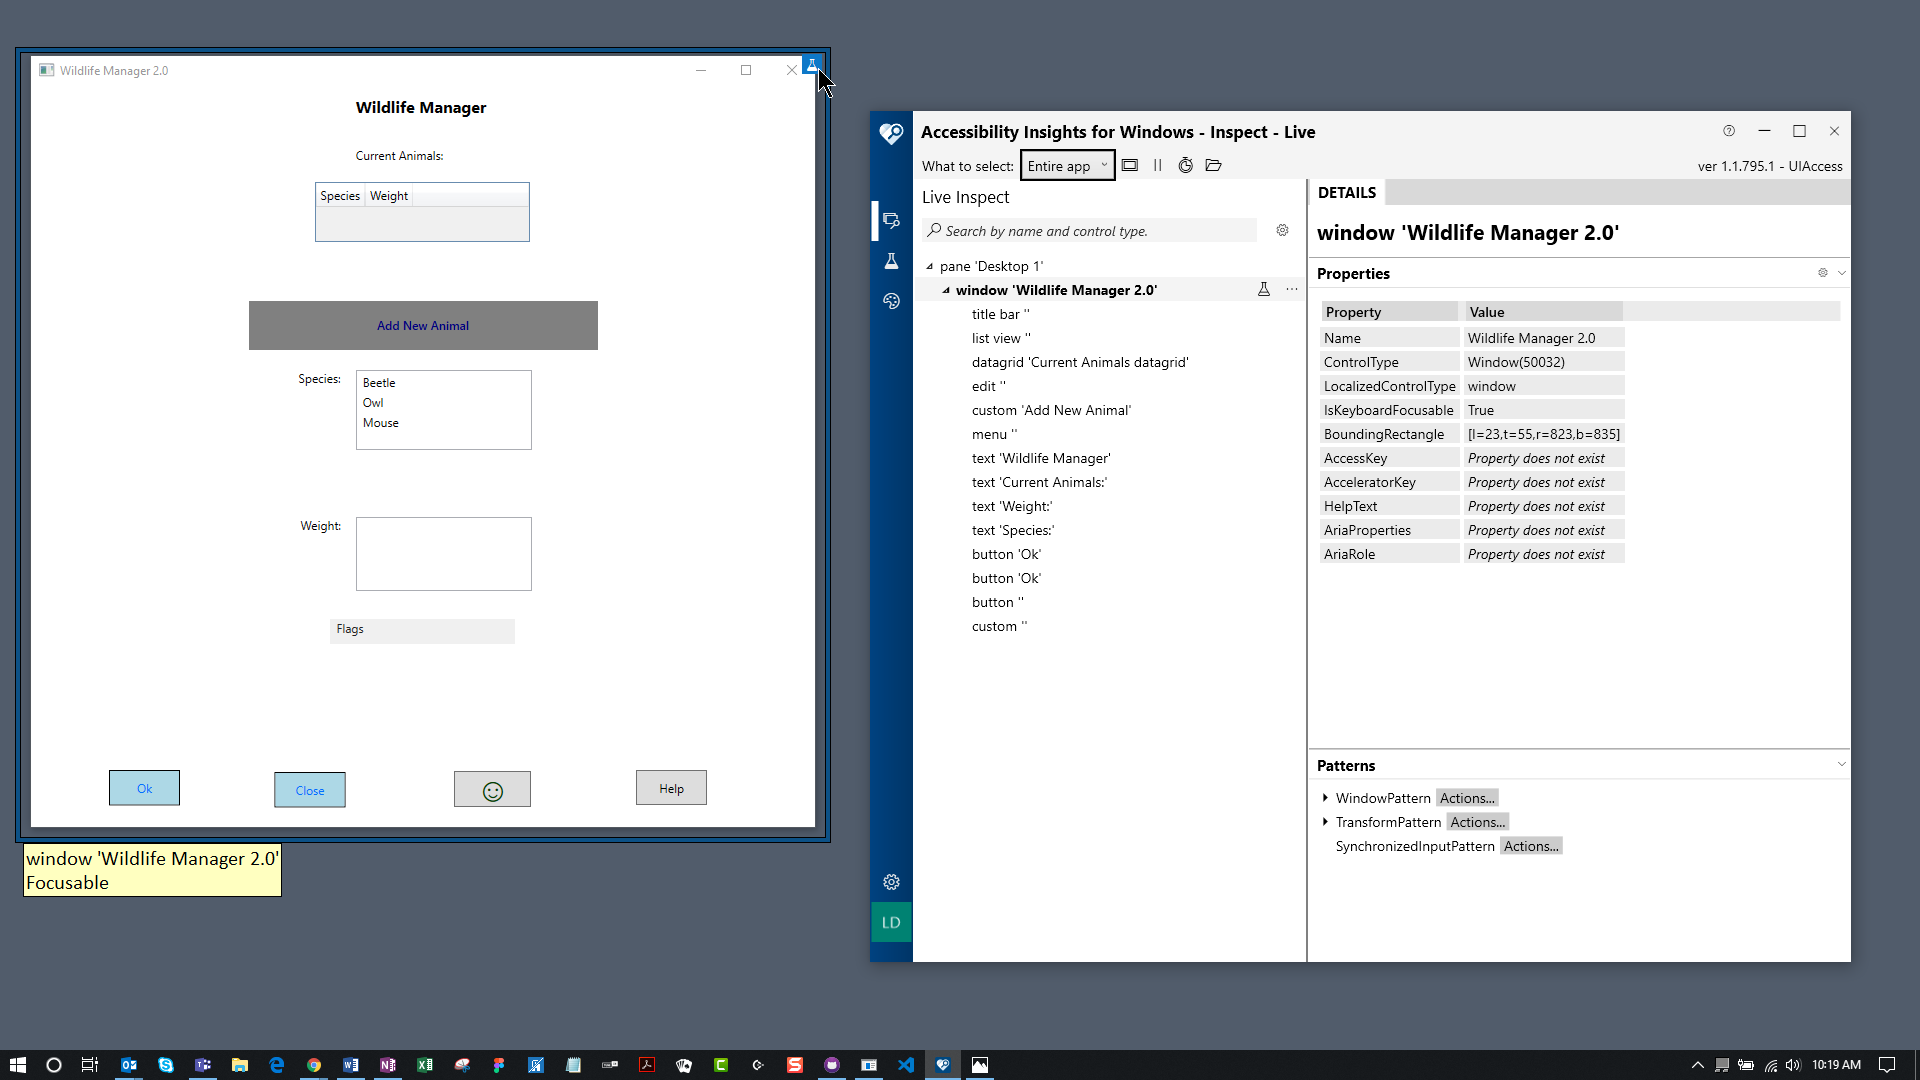 Screenshot showing the target application and Accessibility Insights for Windows